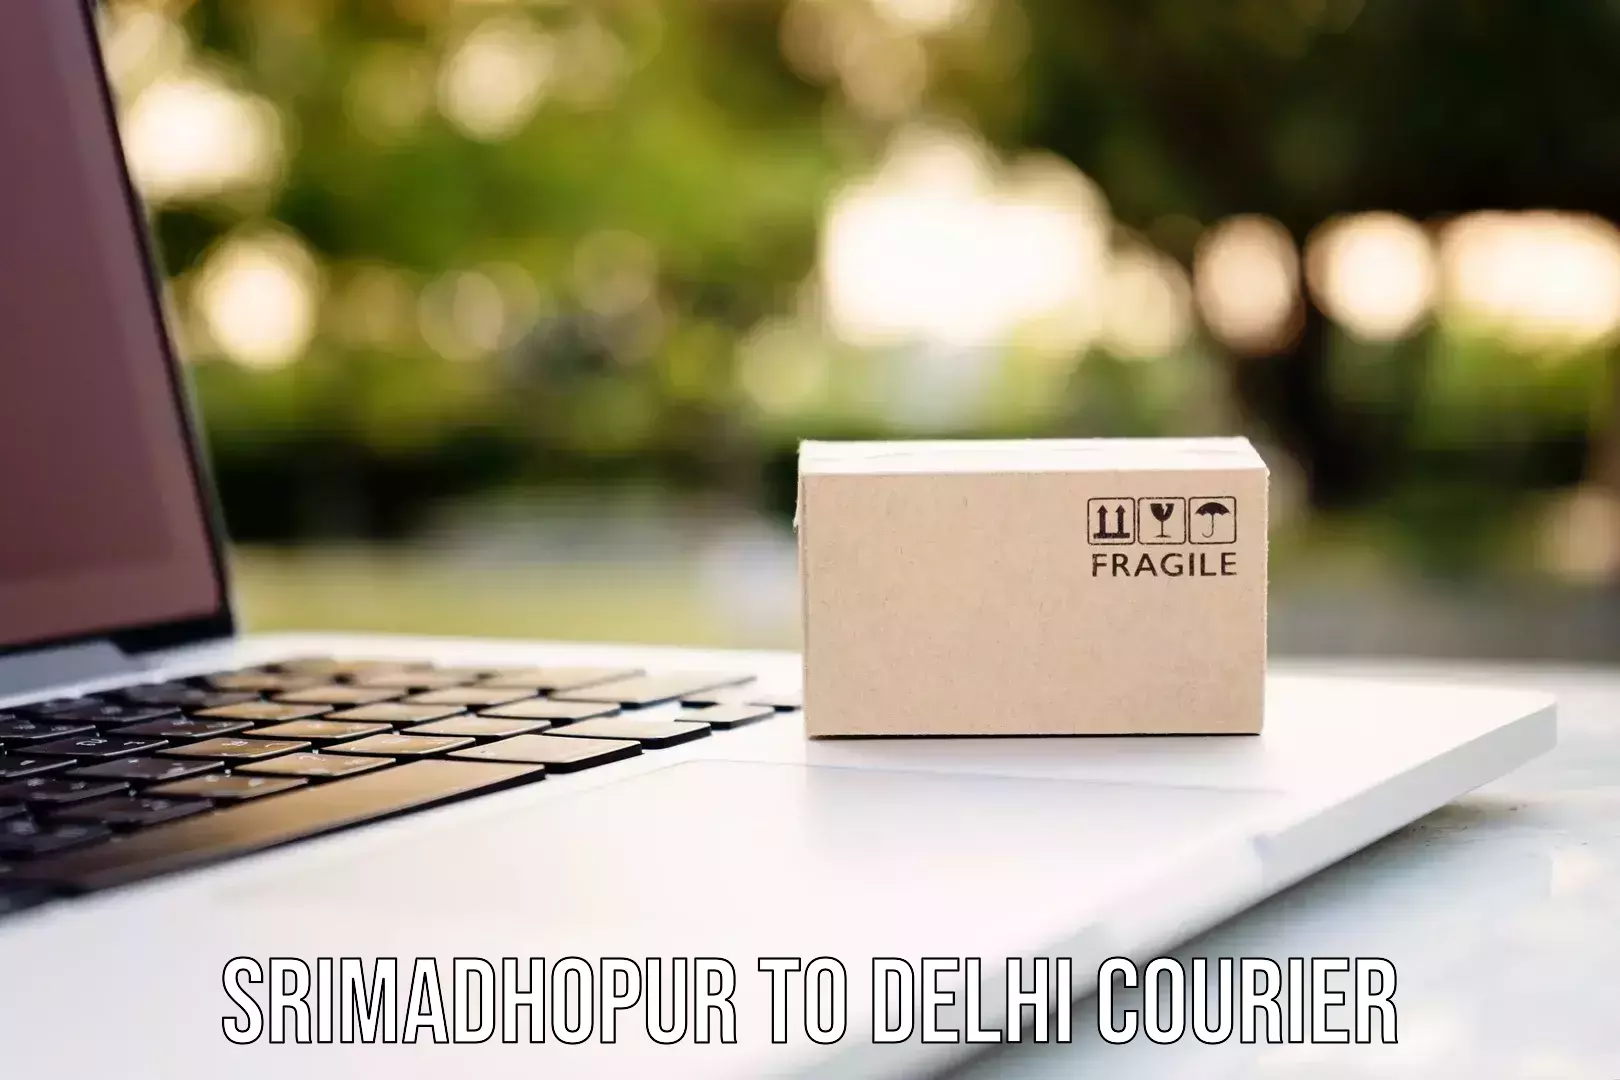 Courier service partnerships in Srimadhopur to Delhi